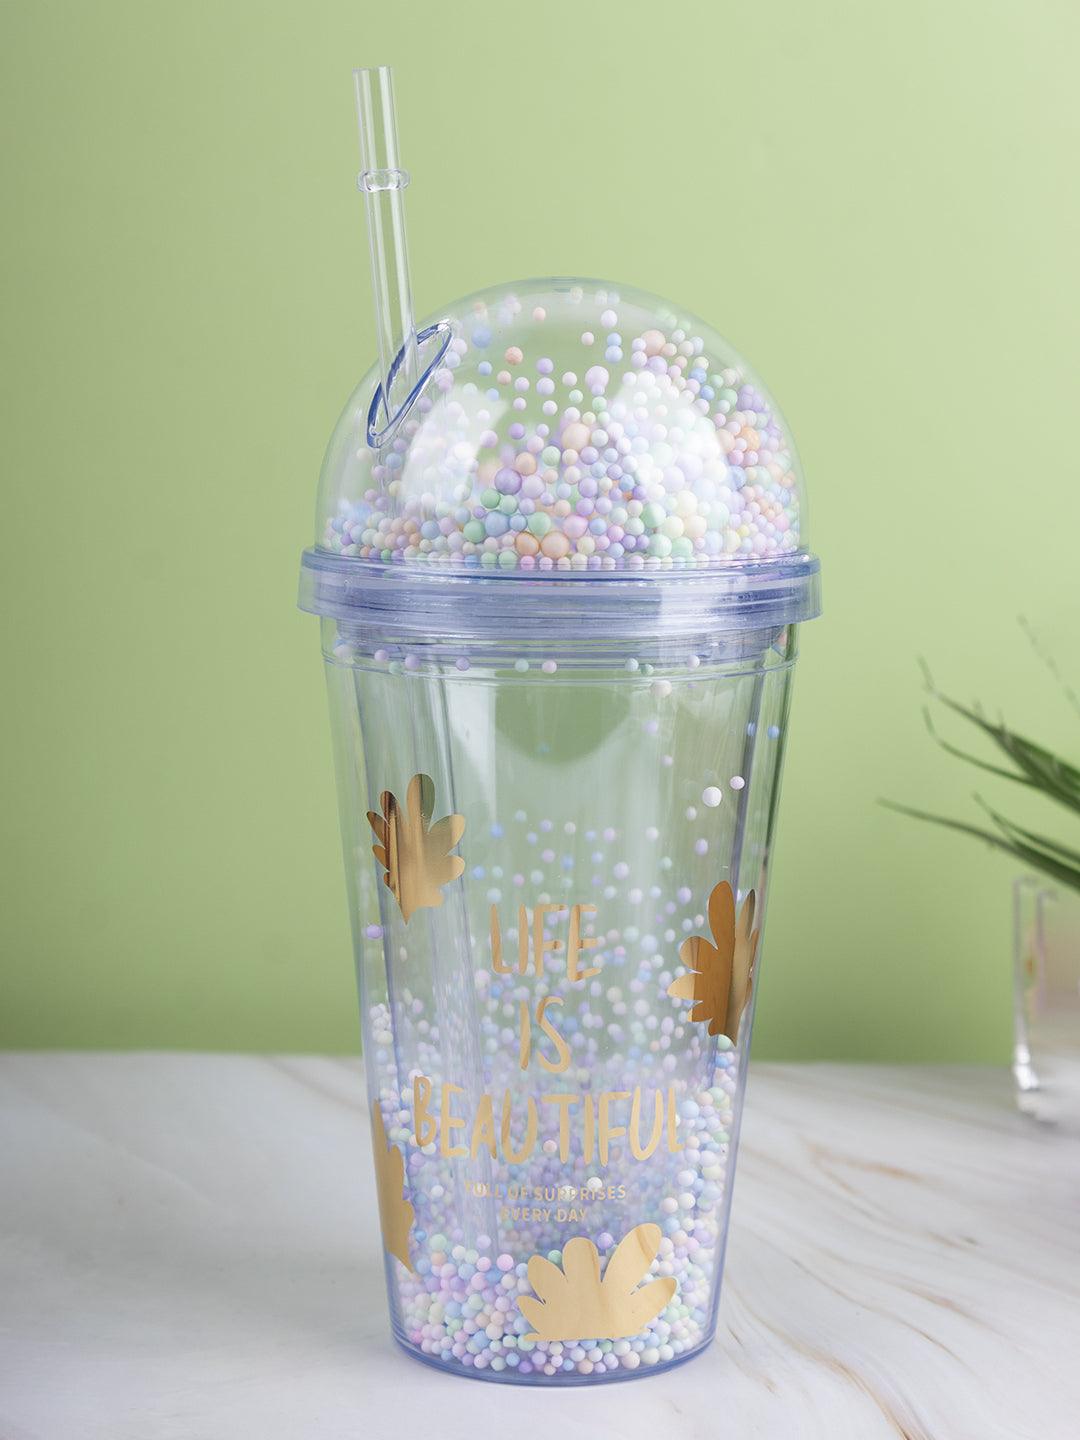 Polystyrene , Sipper With Straw 450 Ml, Colorfull Thermacol Balls, Glossy : Finish, Multicolor - MARKET 99